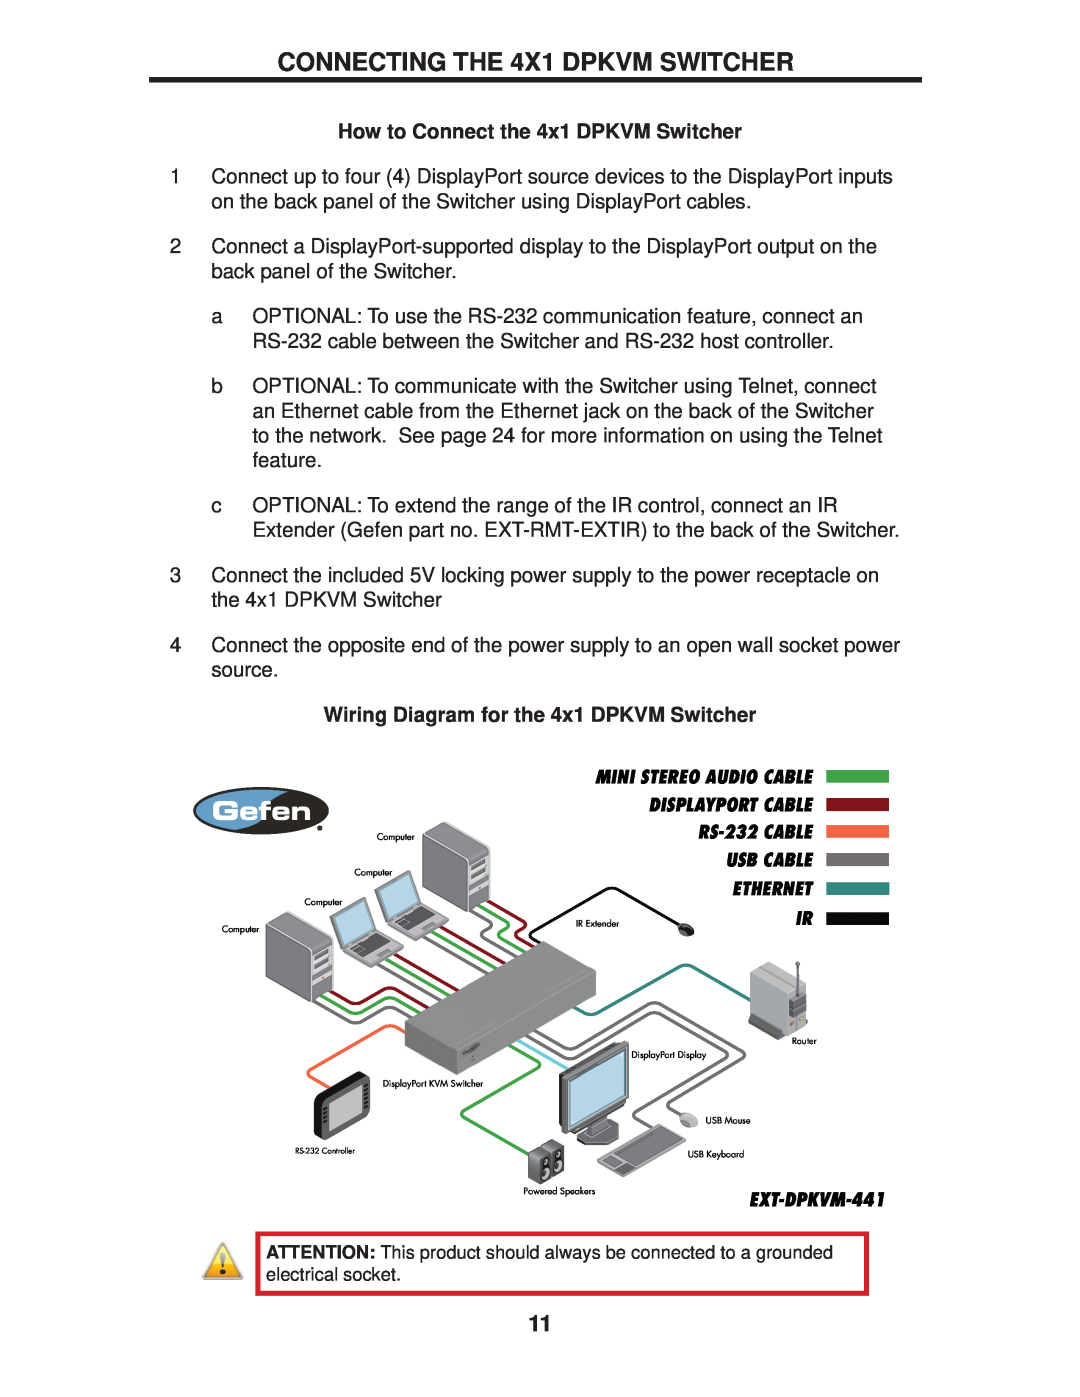 Gefen EXT-DPKVM-441 Ethernet, How to Connect the 4x1 DPKVM Switcher, Wiring Diagram for the 4x1 DPKVM Switcher, Computer 